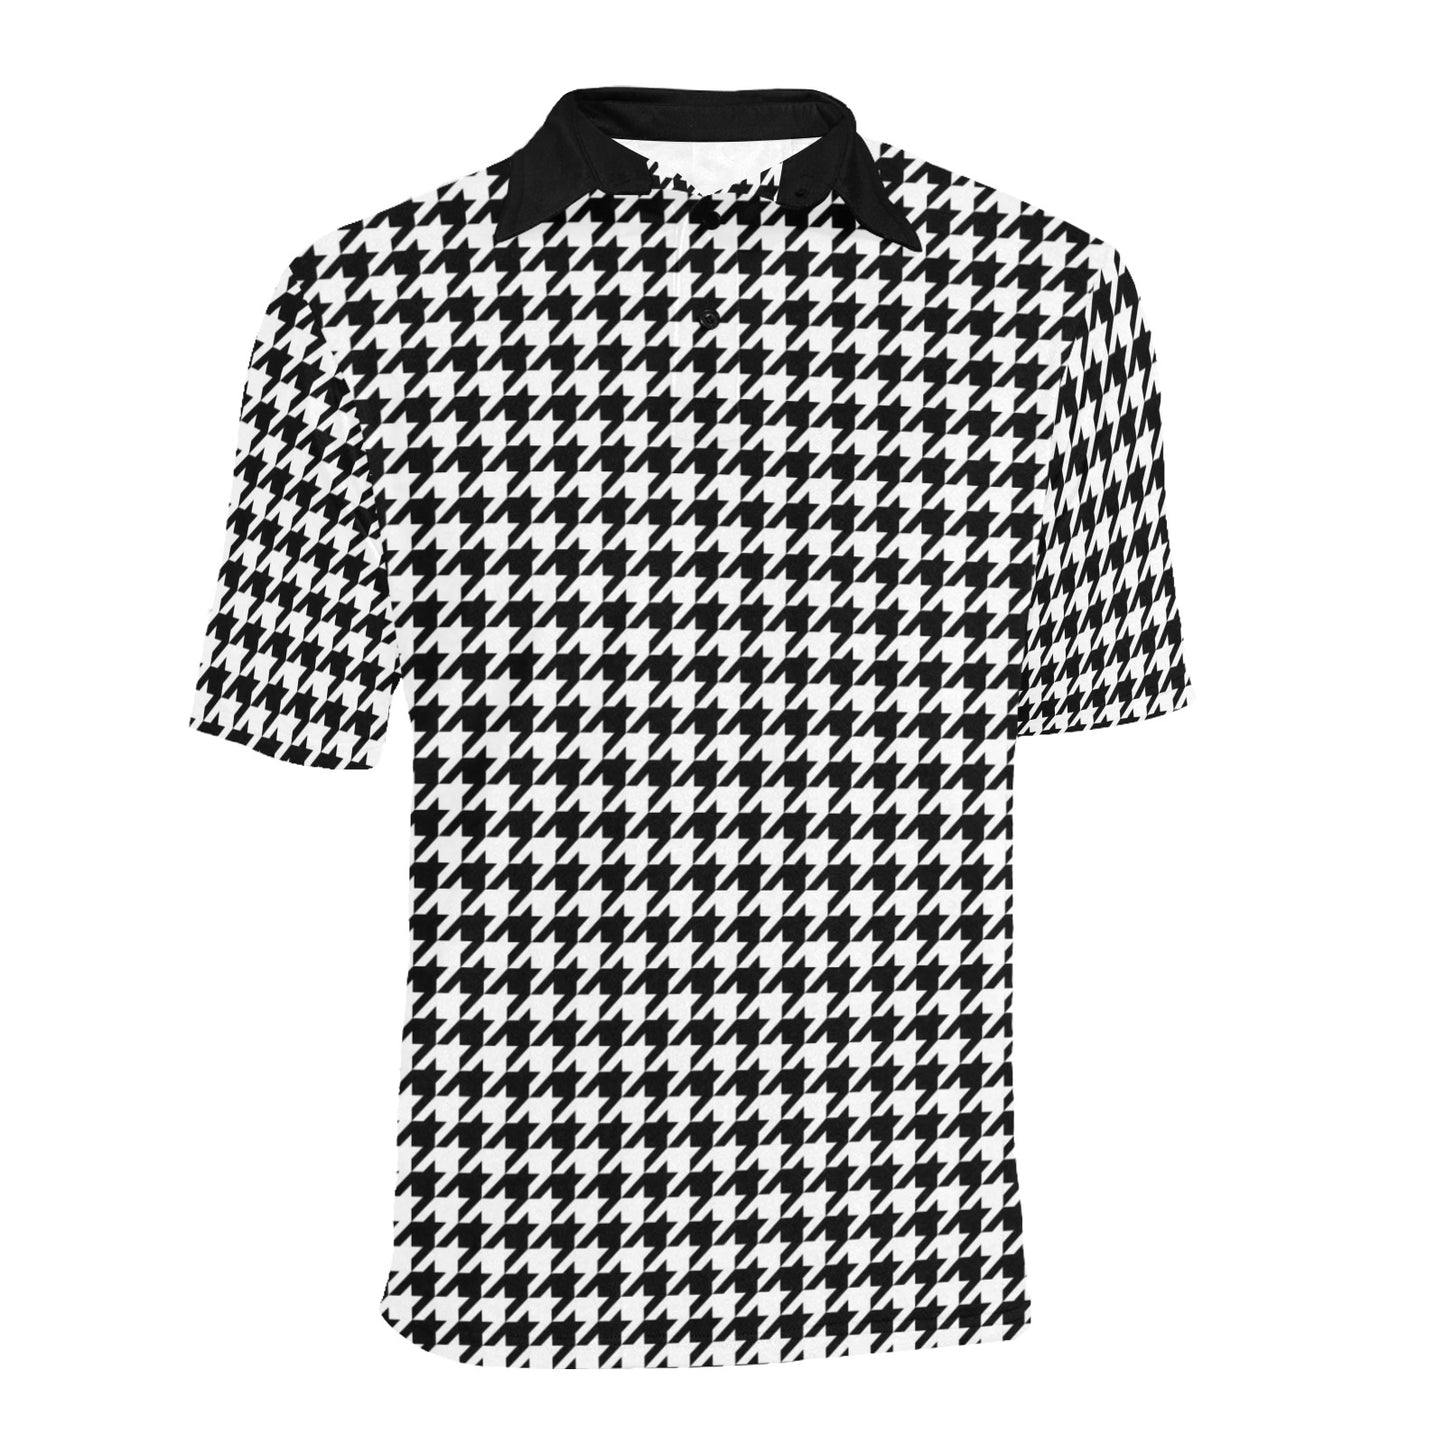 Houndstooth Men Polo Collared Shirt, Vintage Black White Pattern Casual Summer Buttoned Down Up Shirt Short Sleeve Sports Golf Tee